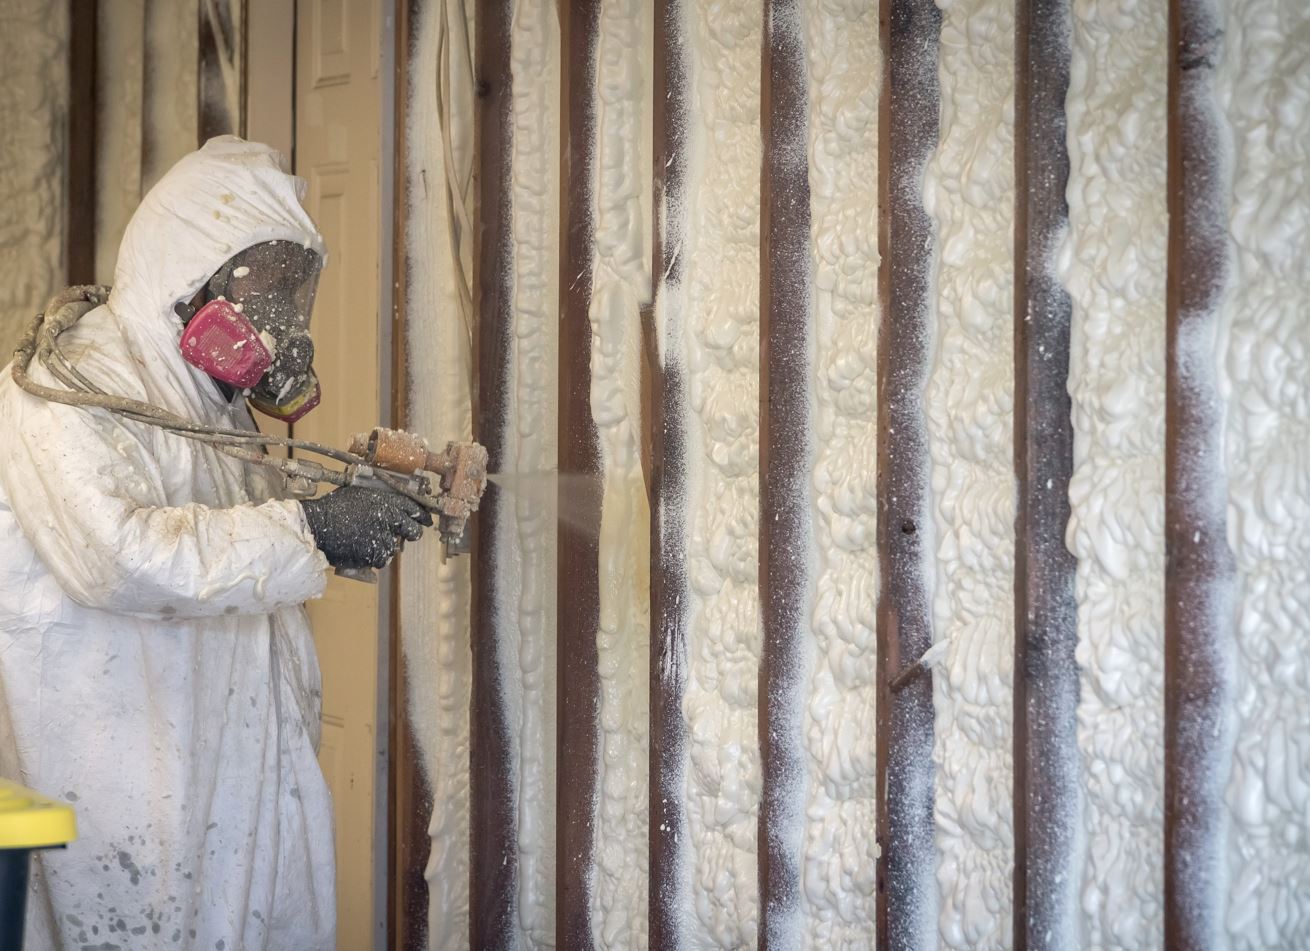 Low-density, open-cell spray insulation